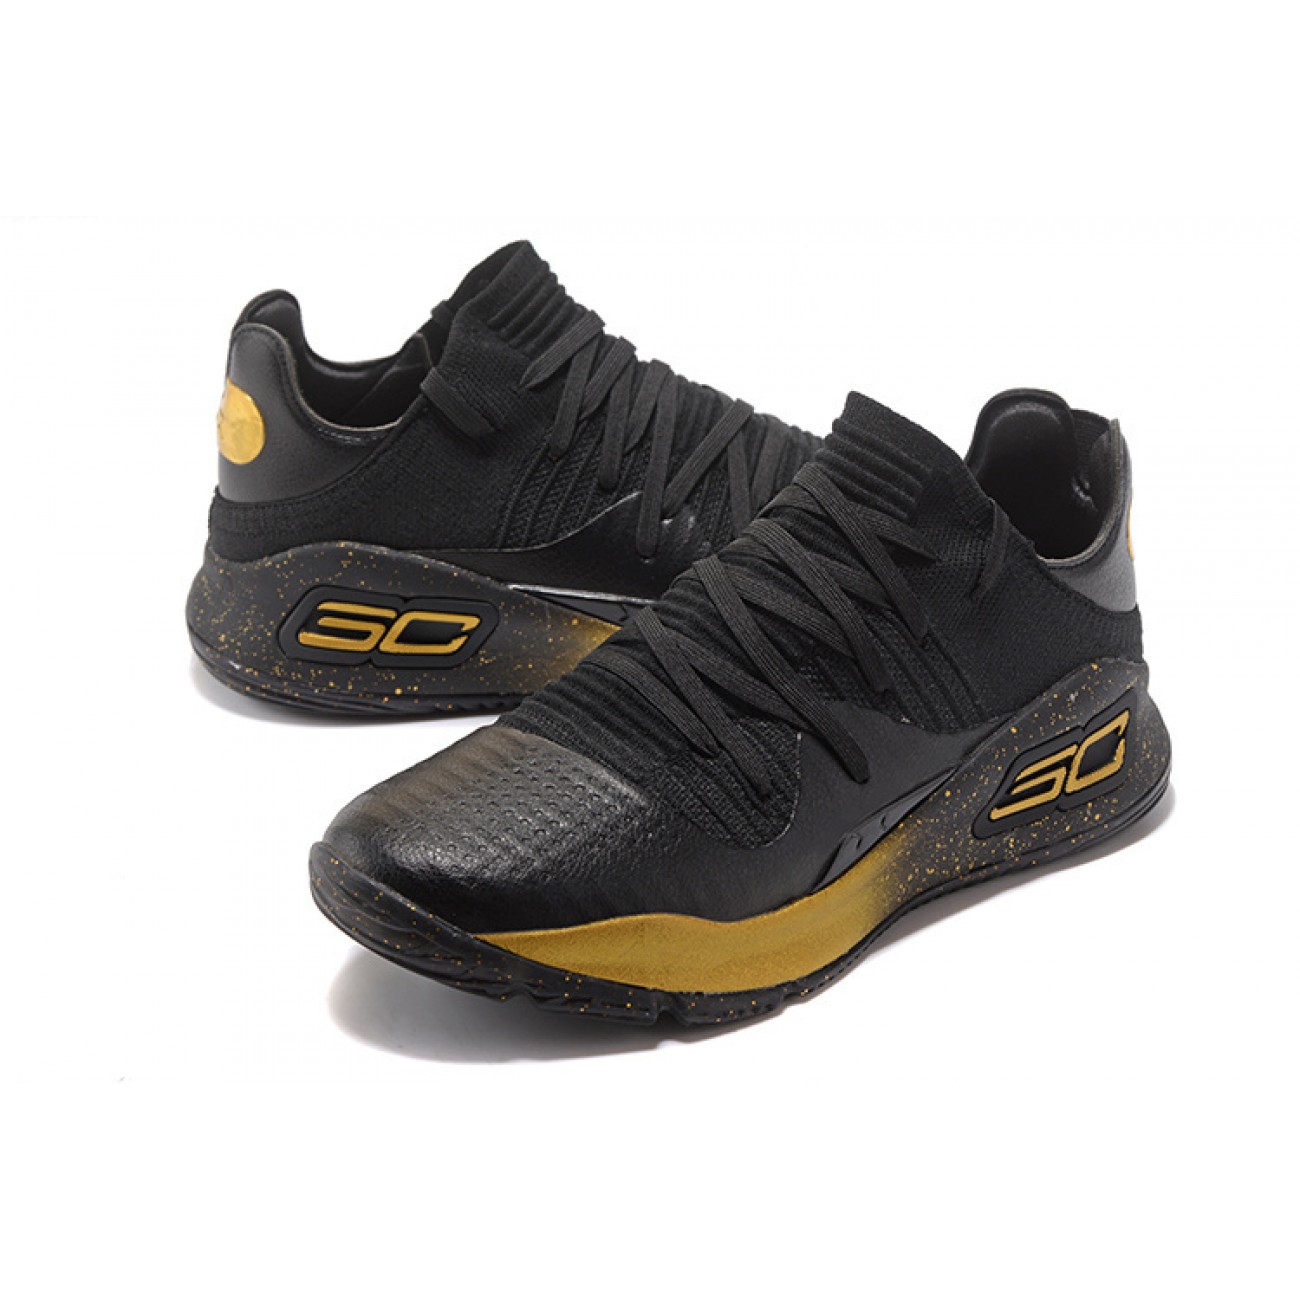 Under Armour UA Curry 4 WMN Low Black/Gold